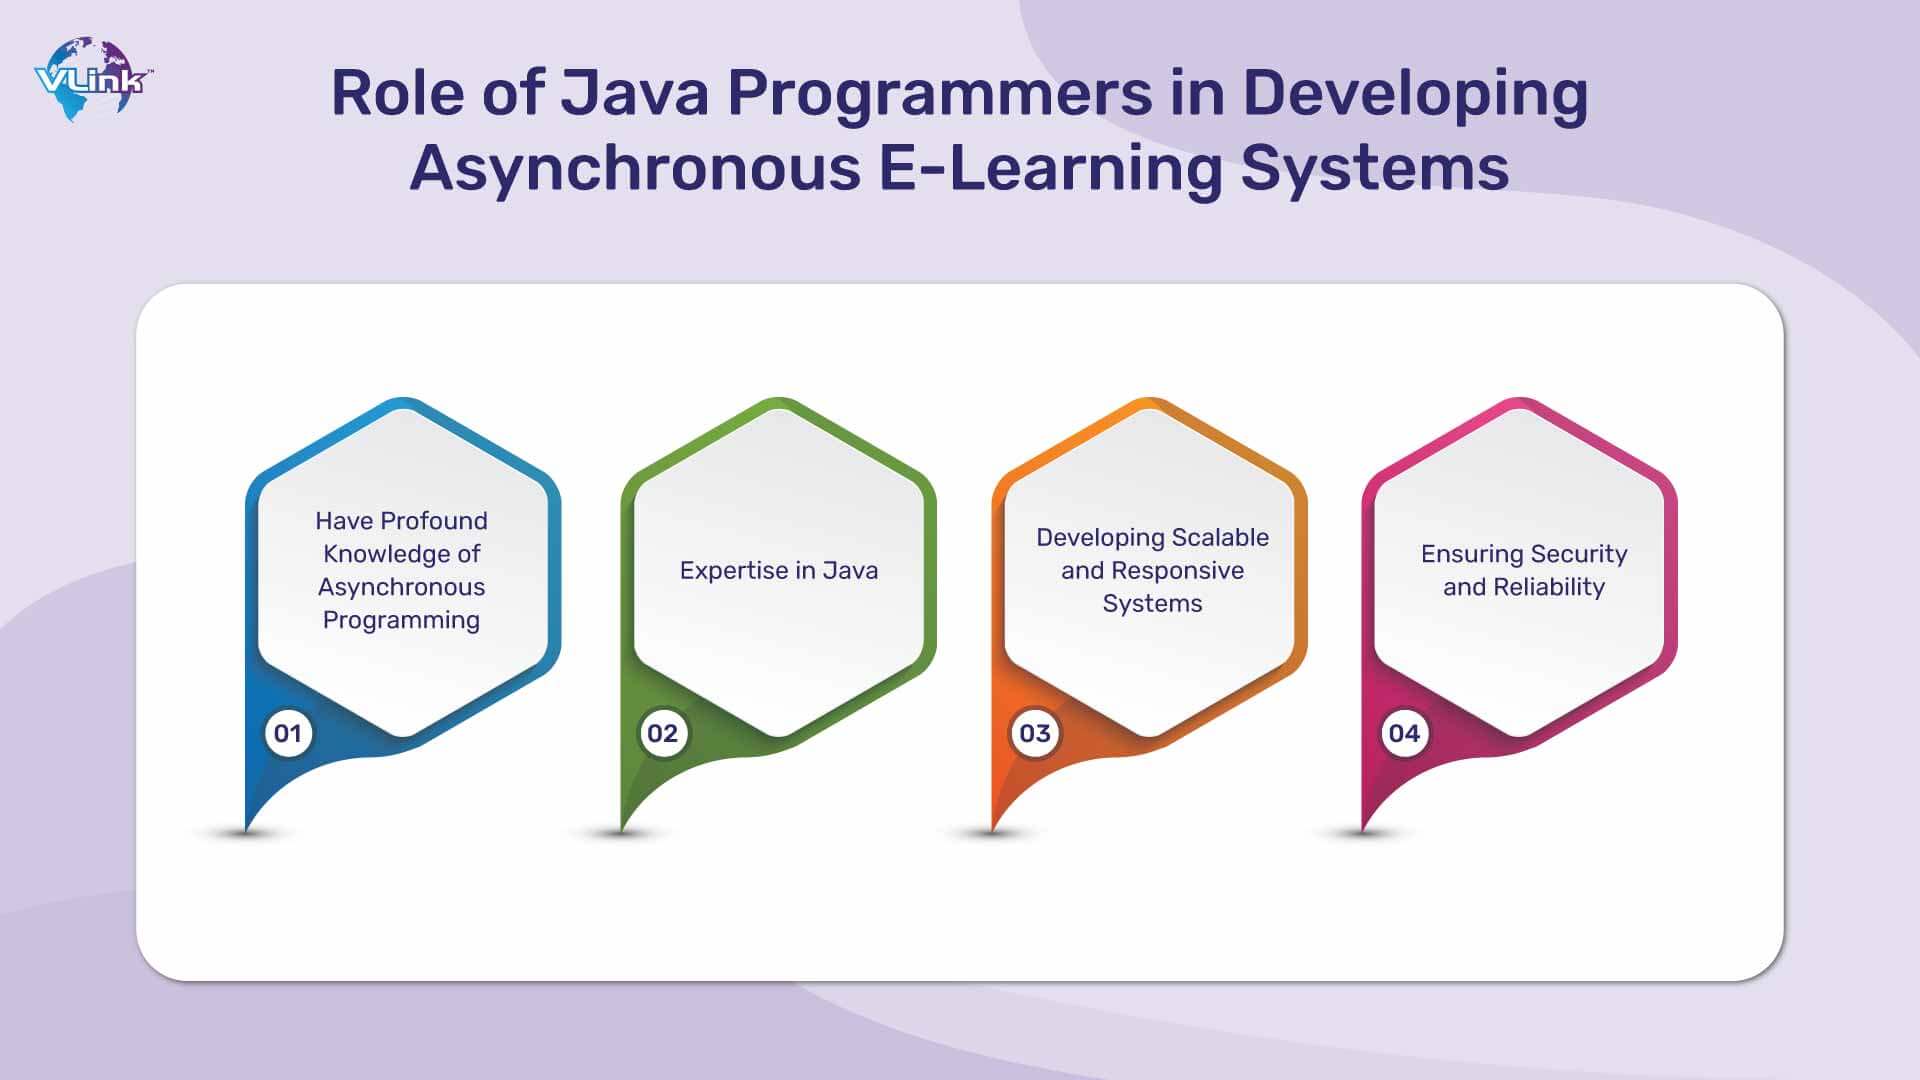 Role of Java Programmers in Developing Asynchronous E-Learning Systems